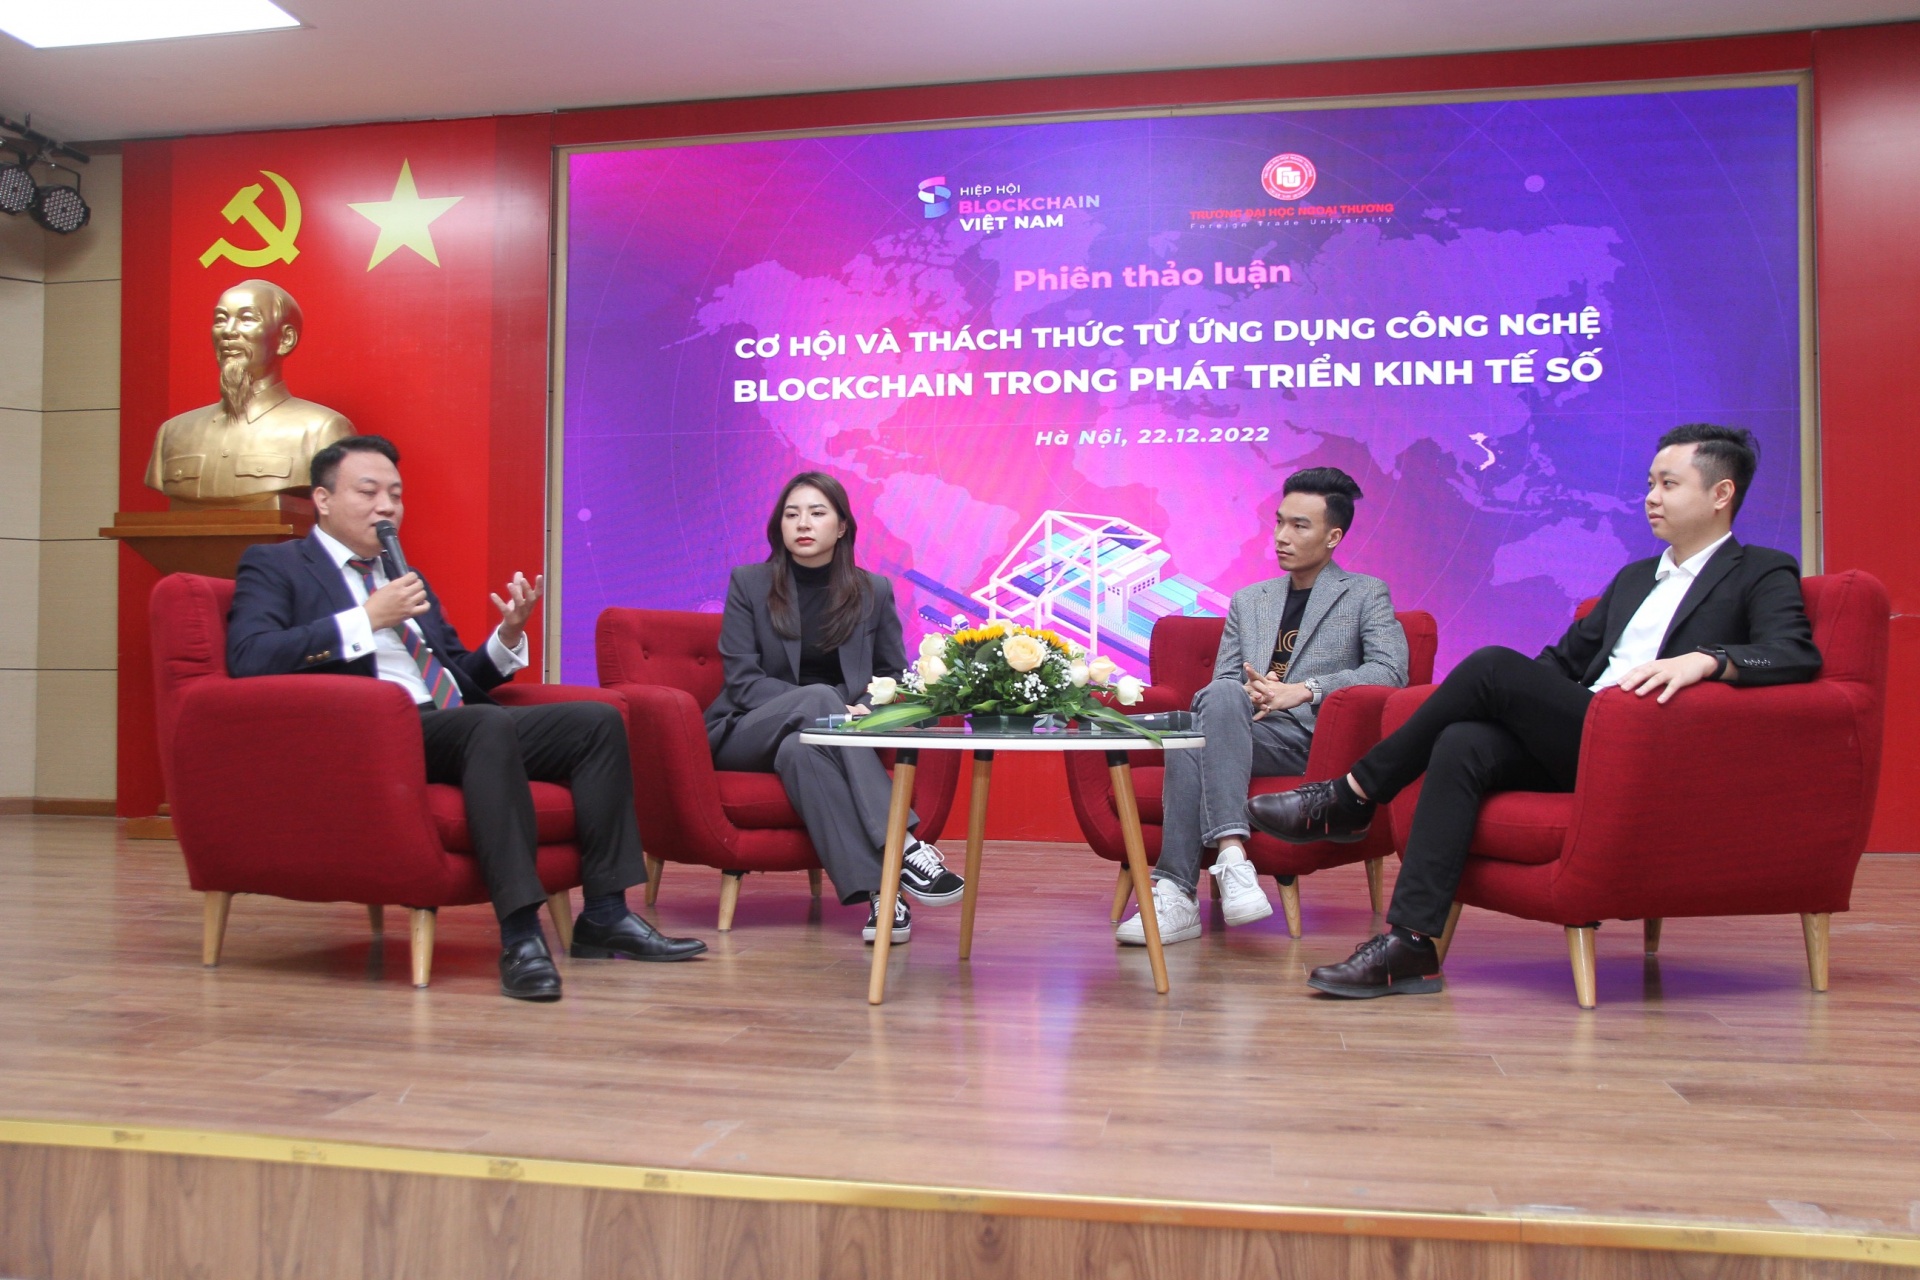 Vietnam Blockchain Association and Foreign Trade University join forces